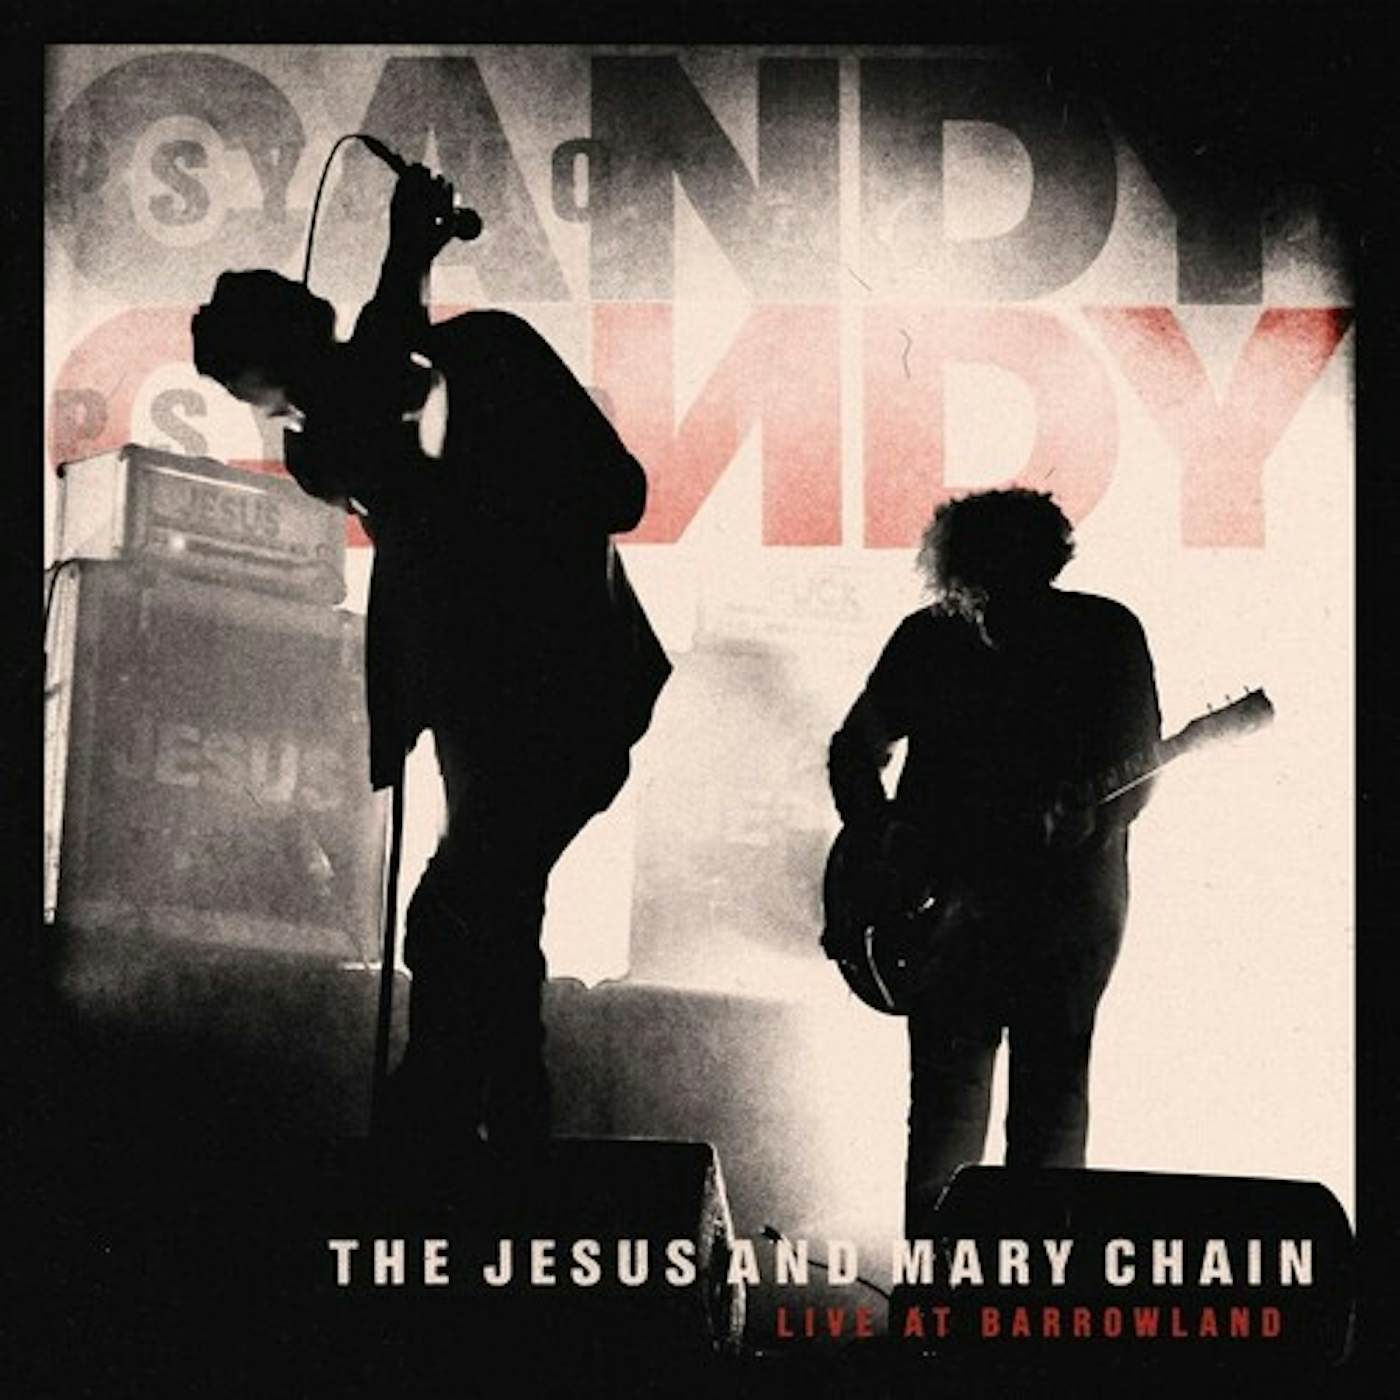 The Jesus and Mary Chain LIVE AT BARROWLAND CD